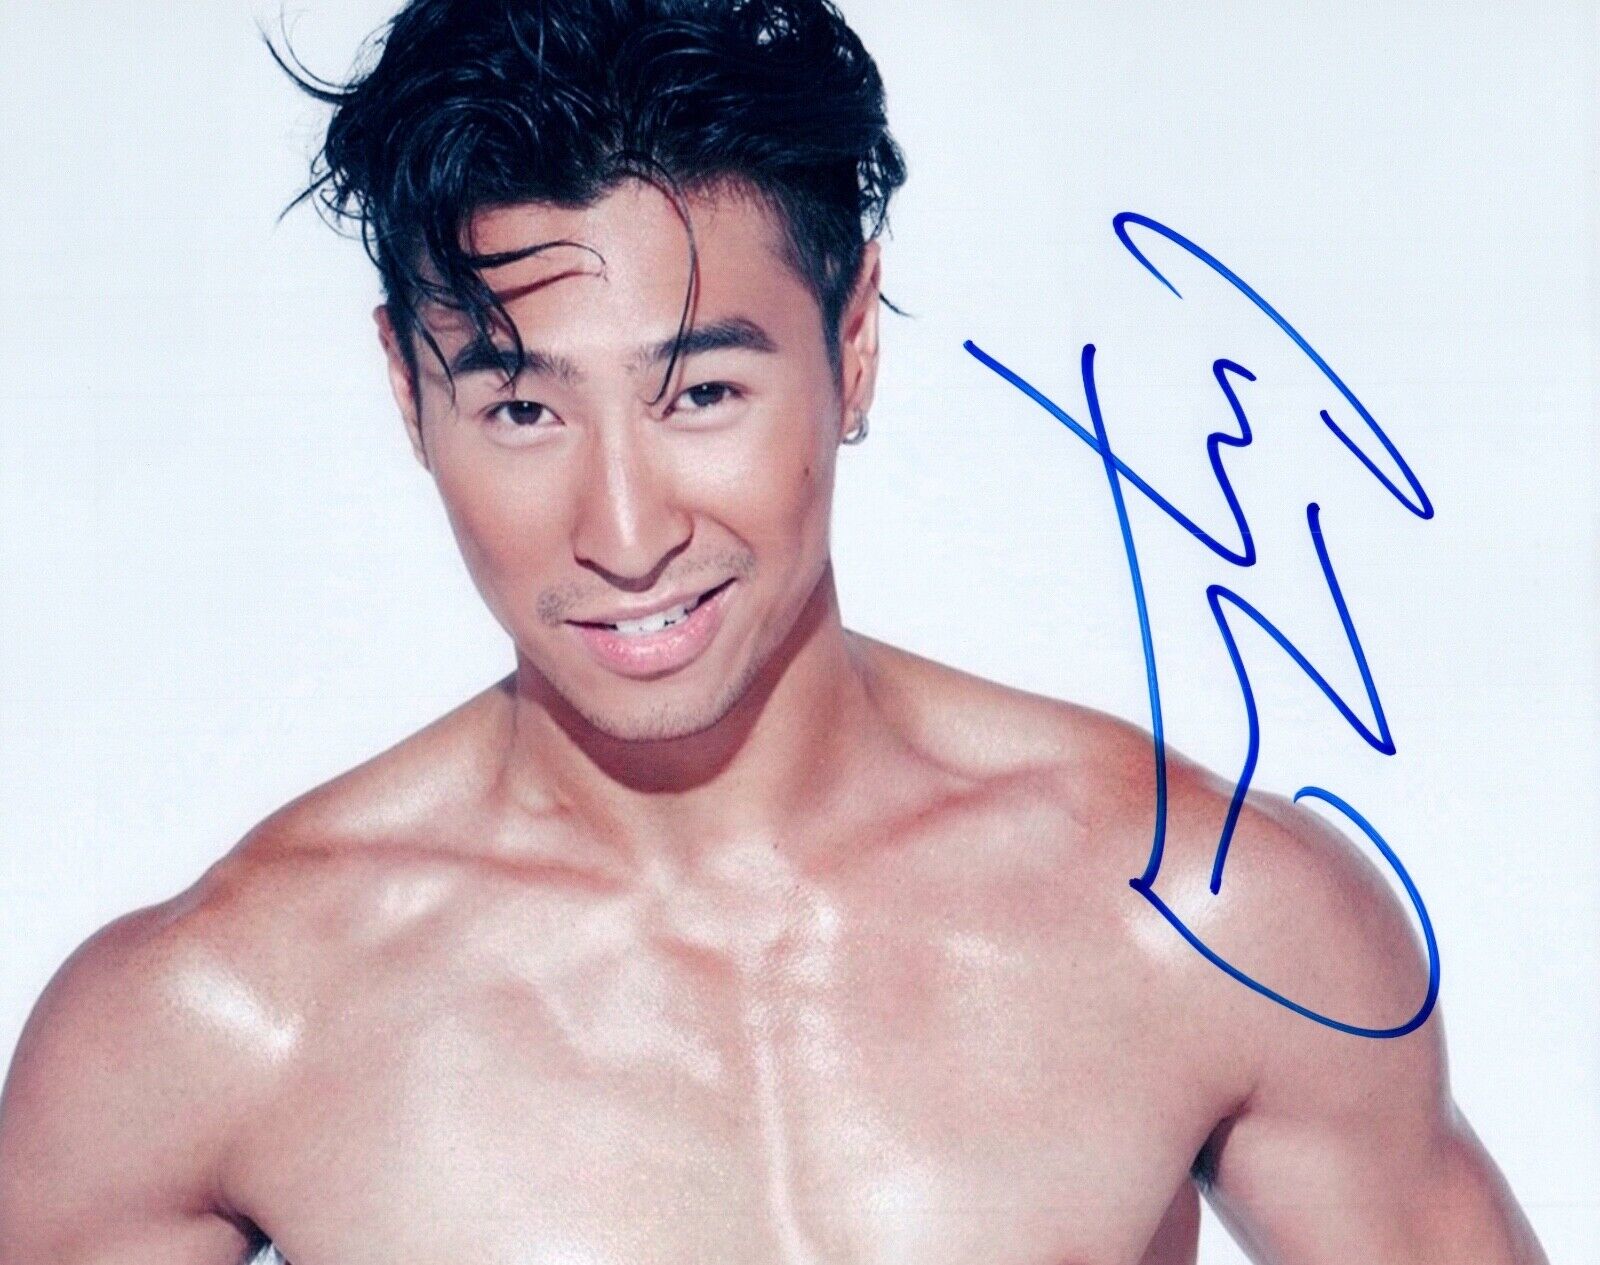 Chris Pang Signed Autographed 8x10 Photo Poster painting CRAZY RICH ASIANS Shirtless Actor COA